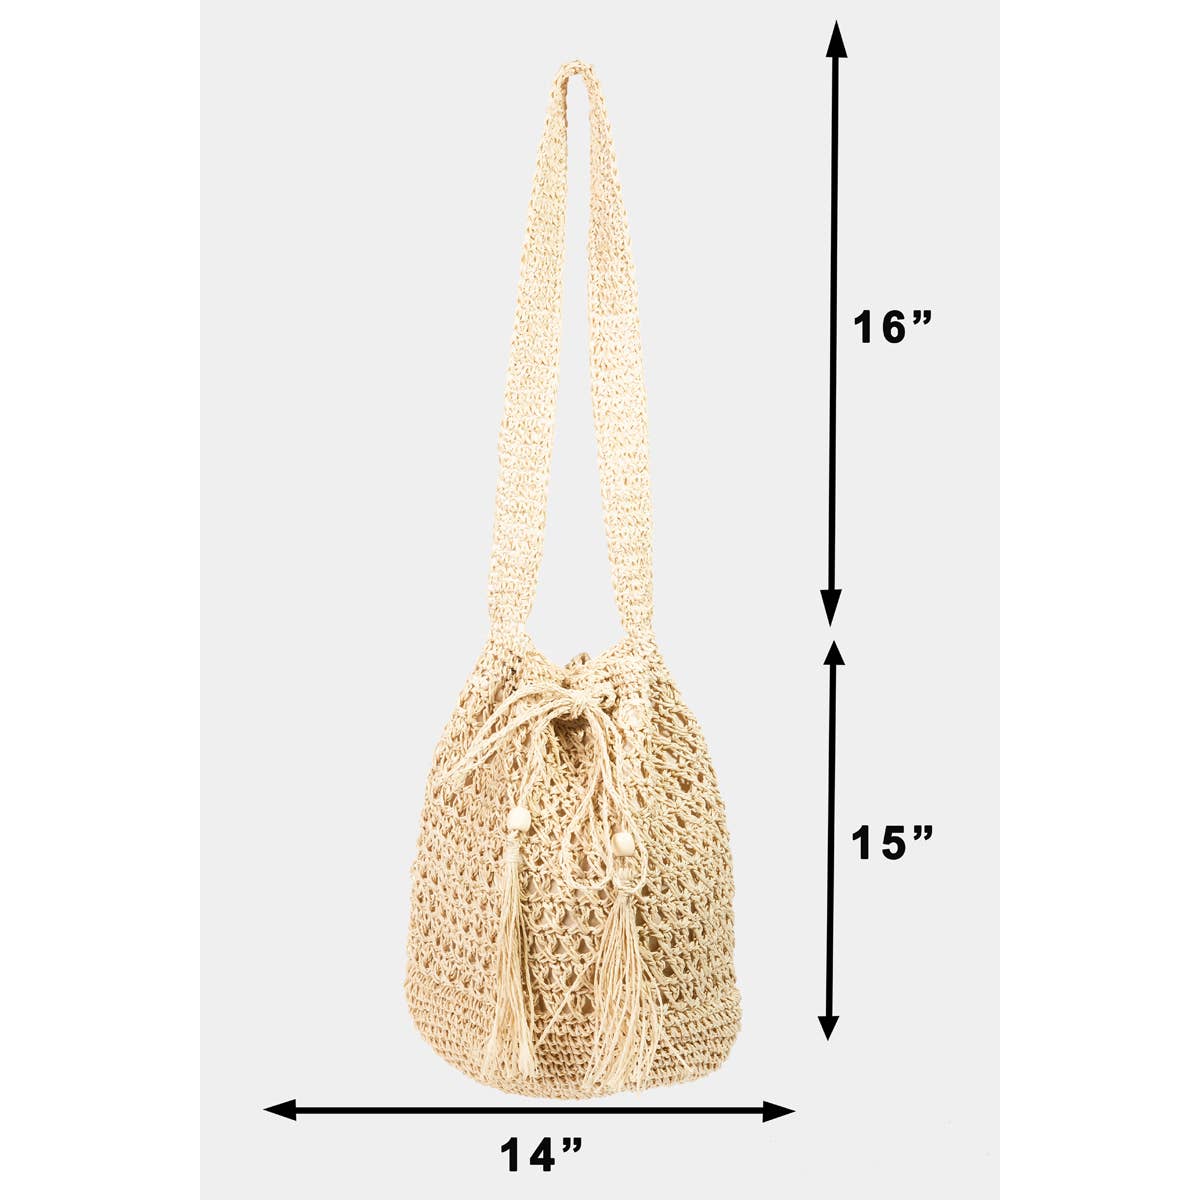 Collections by Fame Accessories - Straw Braided Draw String Tote Bag